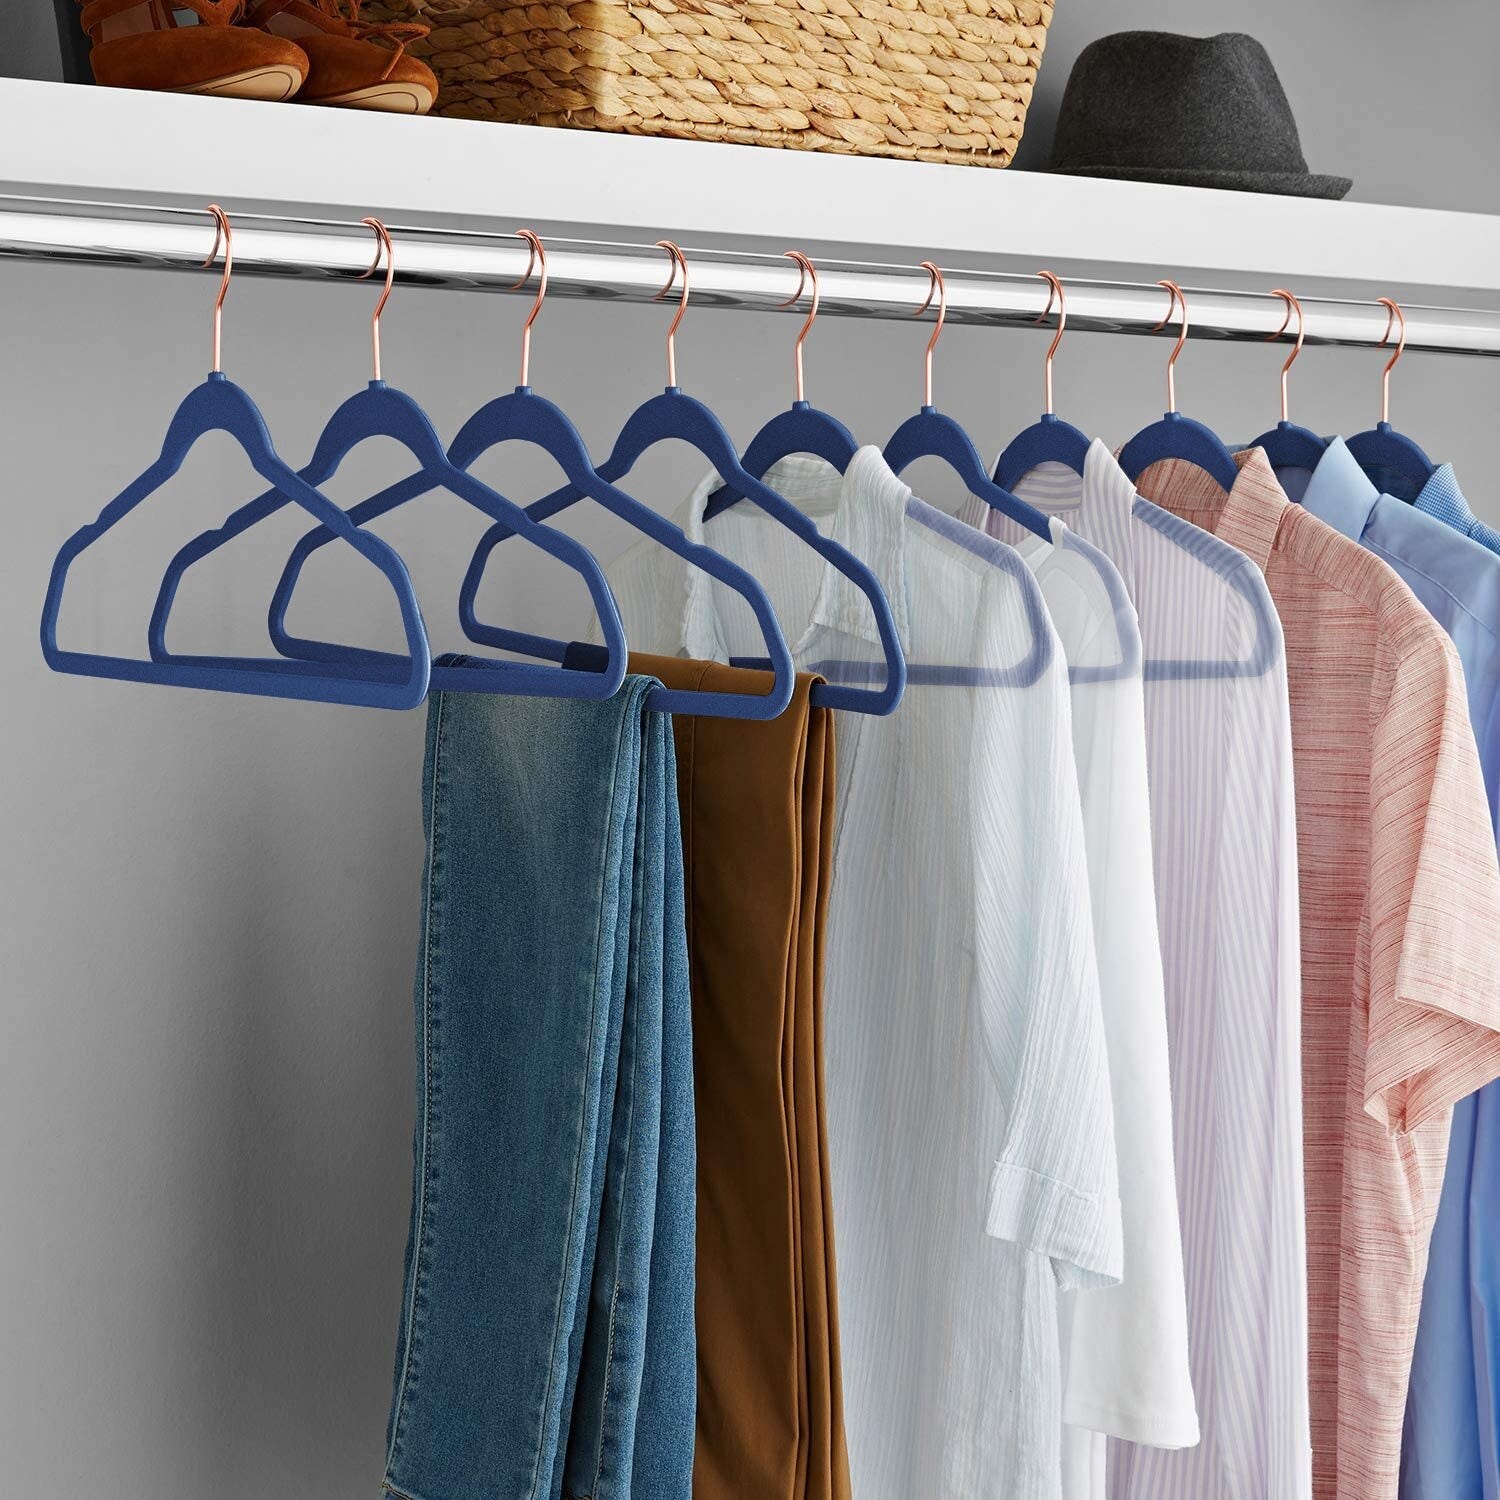 Premium Space Saving Velvet Hangers Holds Up To 10 Lbs, Clothes